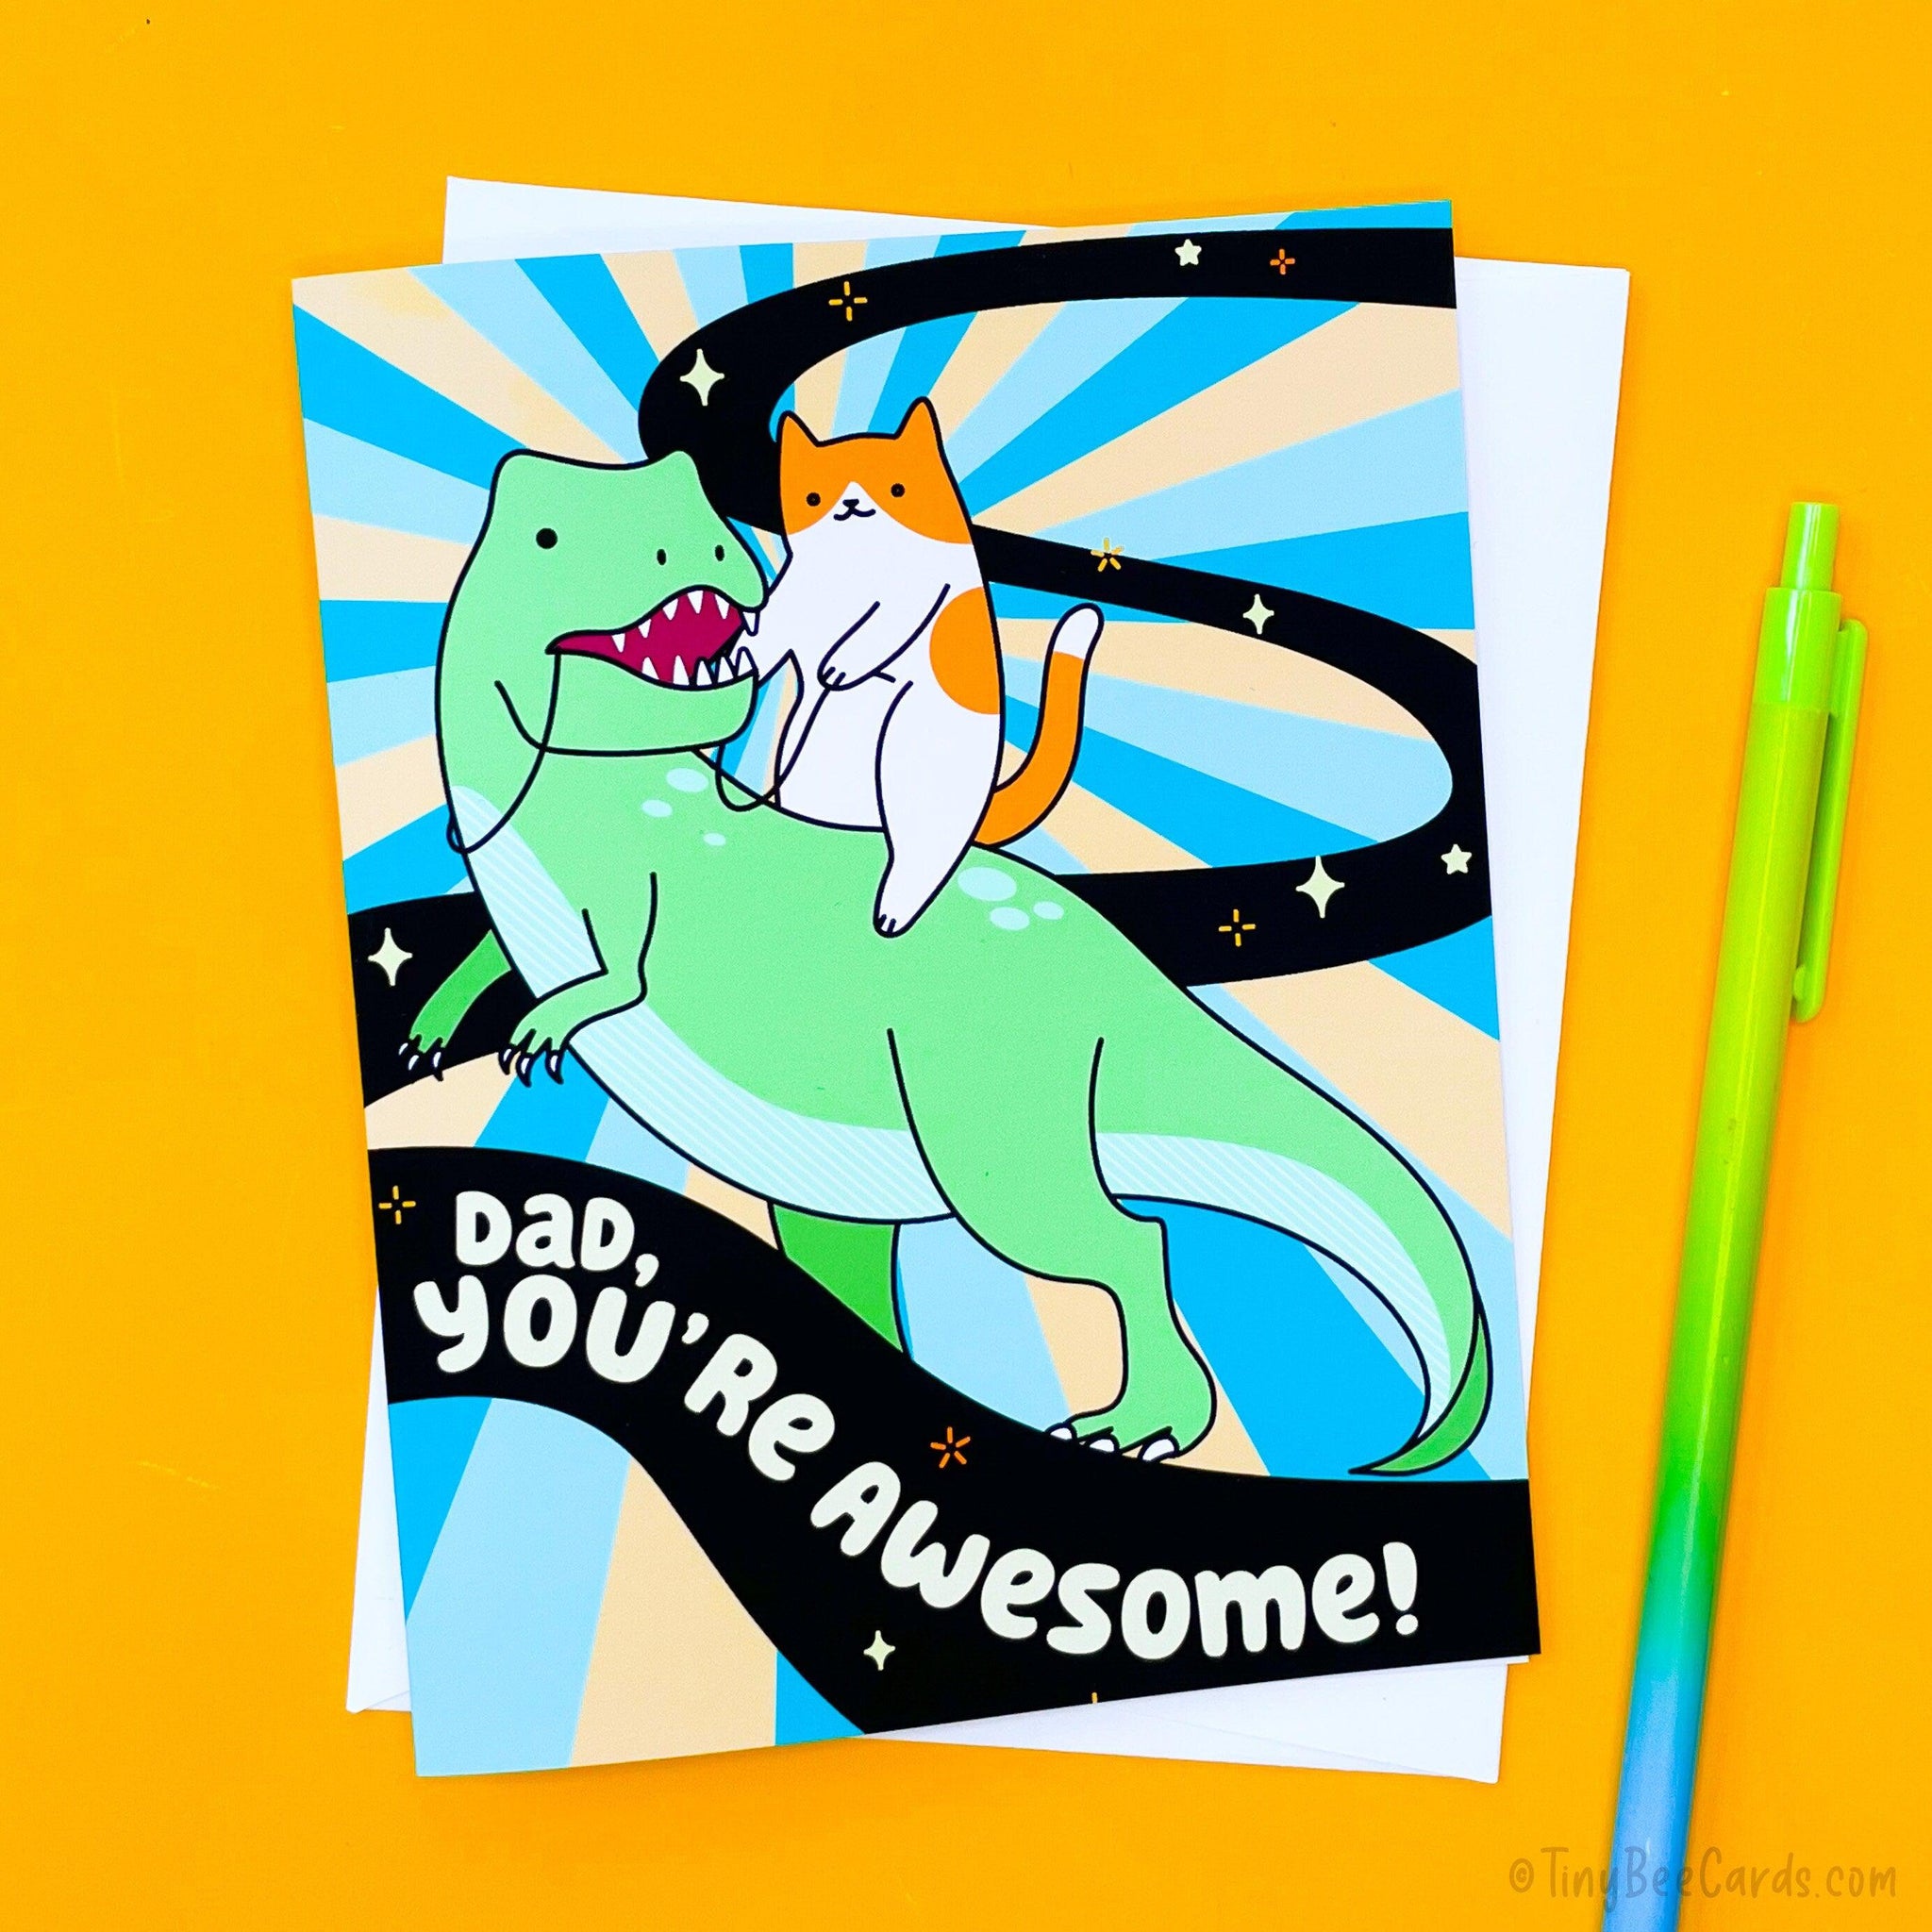 Cat Riding T-Rex Dinosaur Father's Day or Birthday Card "Dad, You're Awesome"